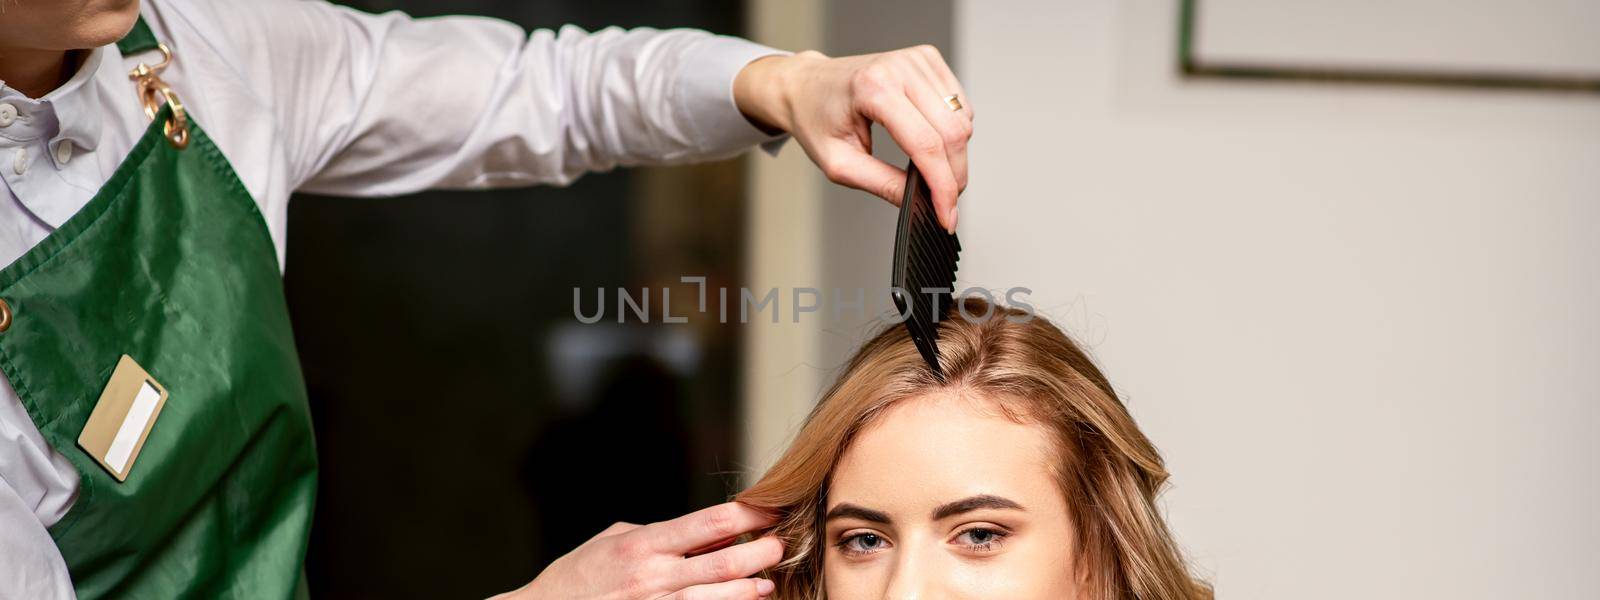 Hairdresser combing long hair of young caucasian woman looking at the camera and smiling in beauty salon